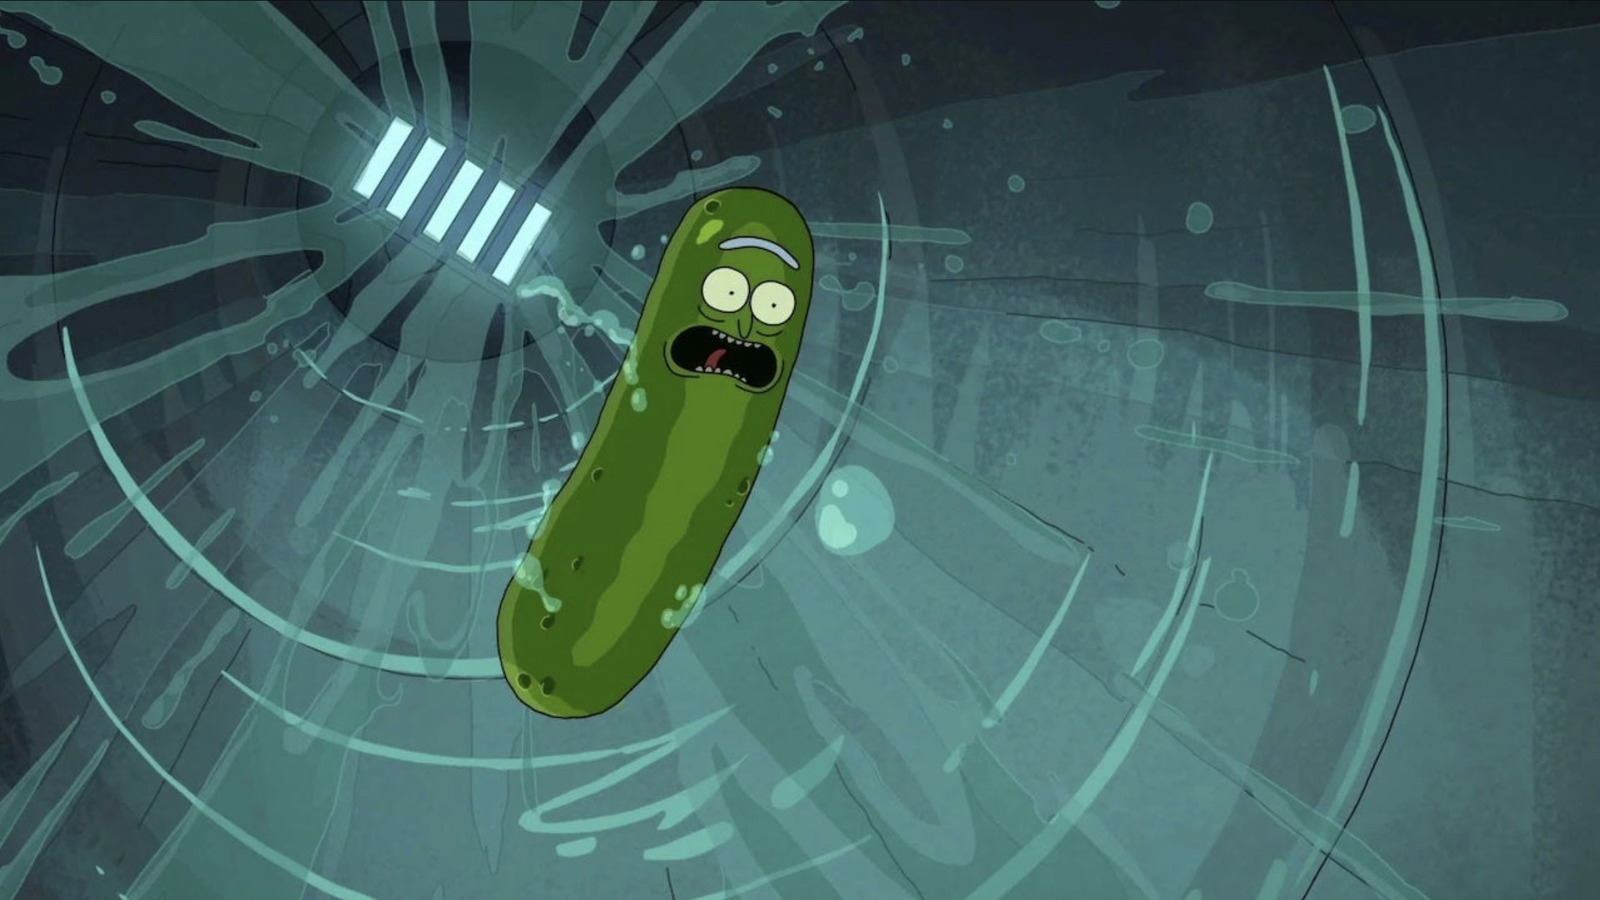 #Justin Roiland And Dan Harmon Had No Idea Rick And Morty’s Pickle Rick Would Be Such A Hit